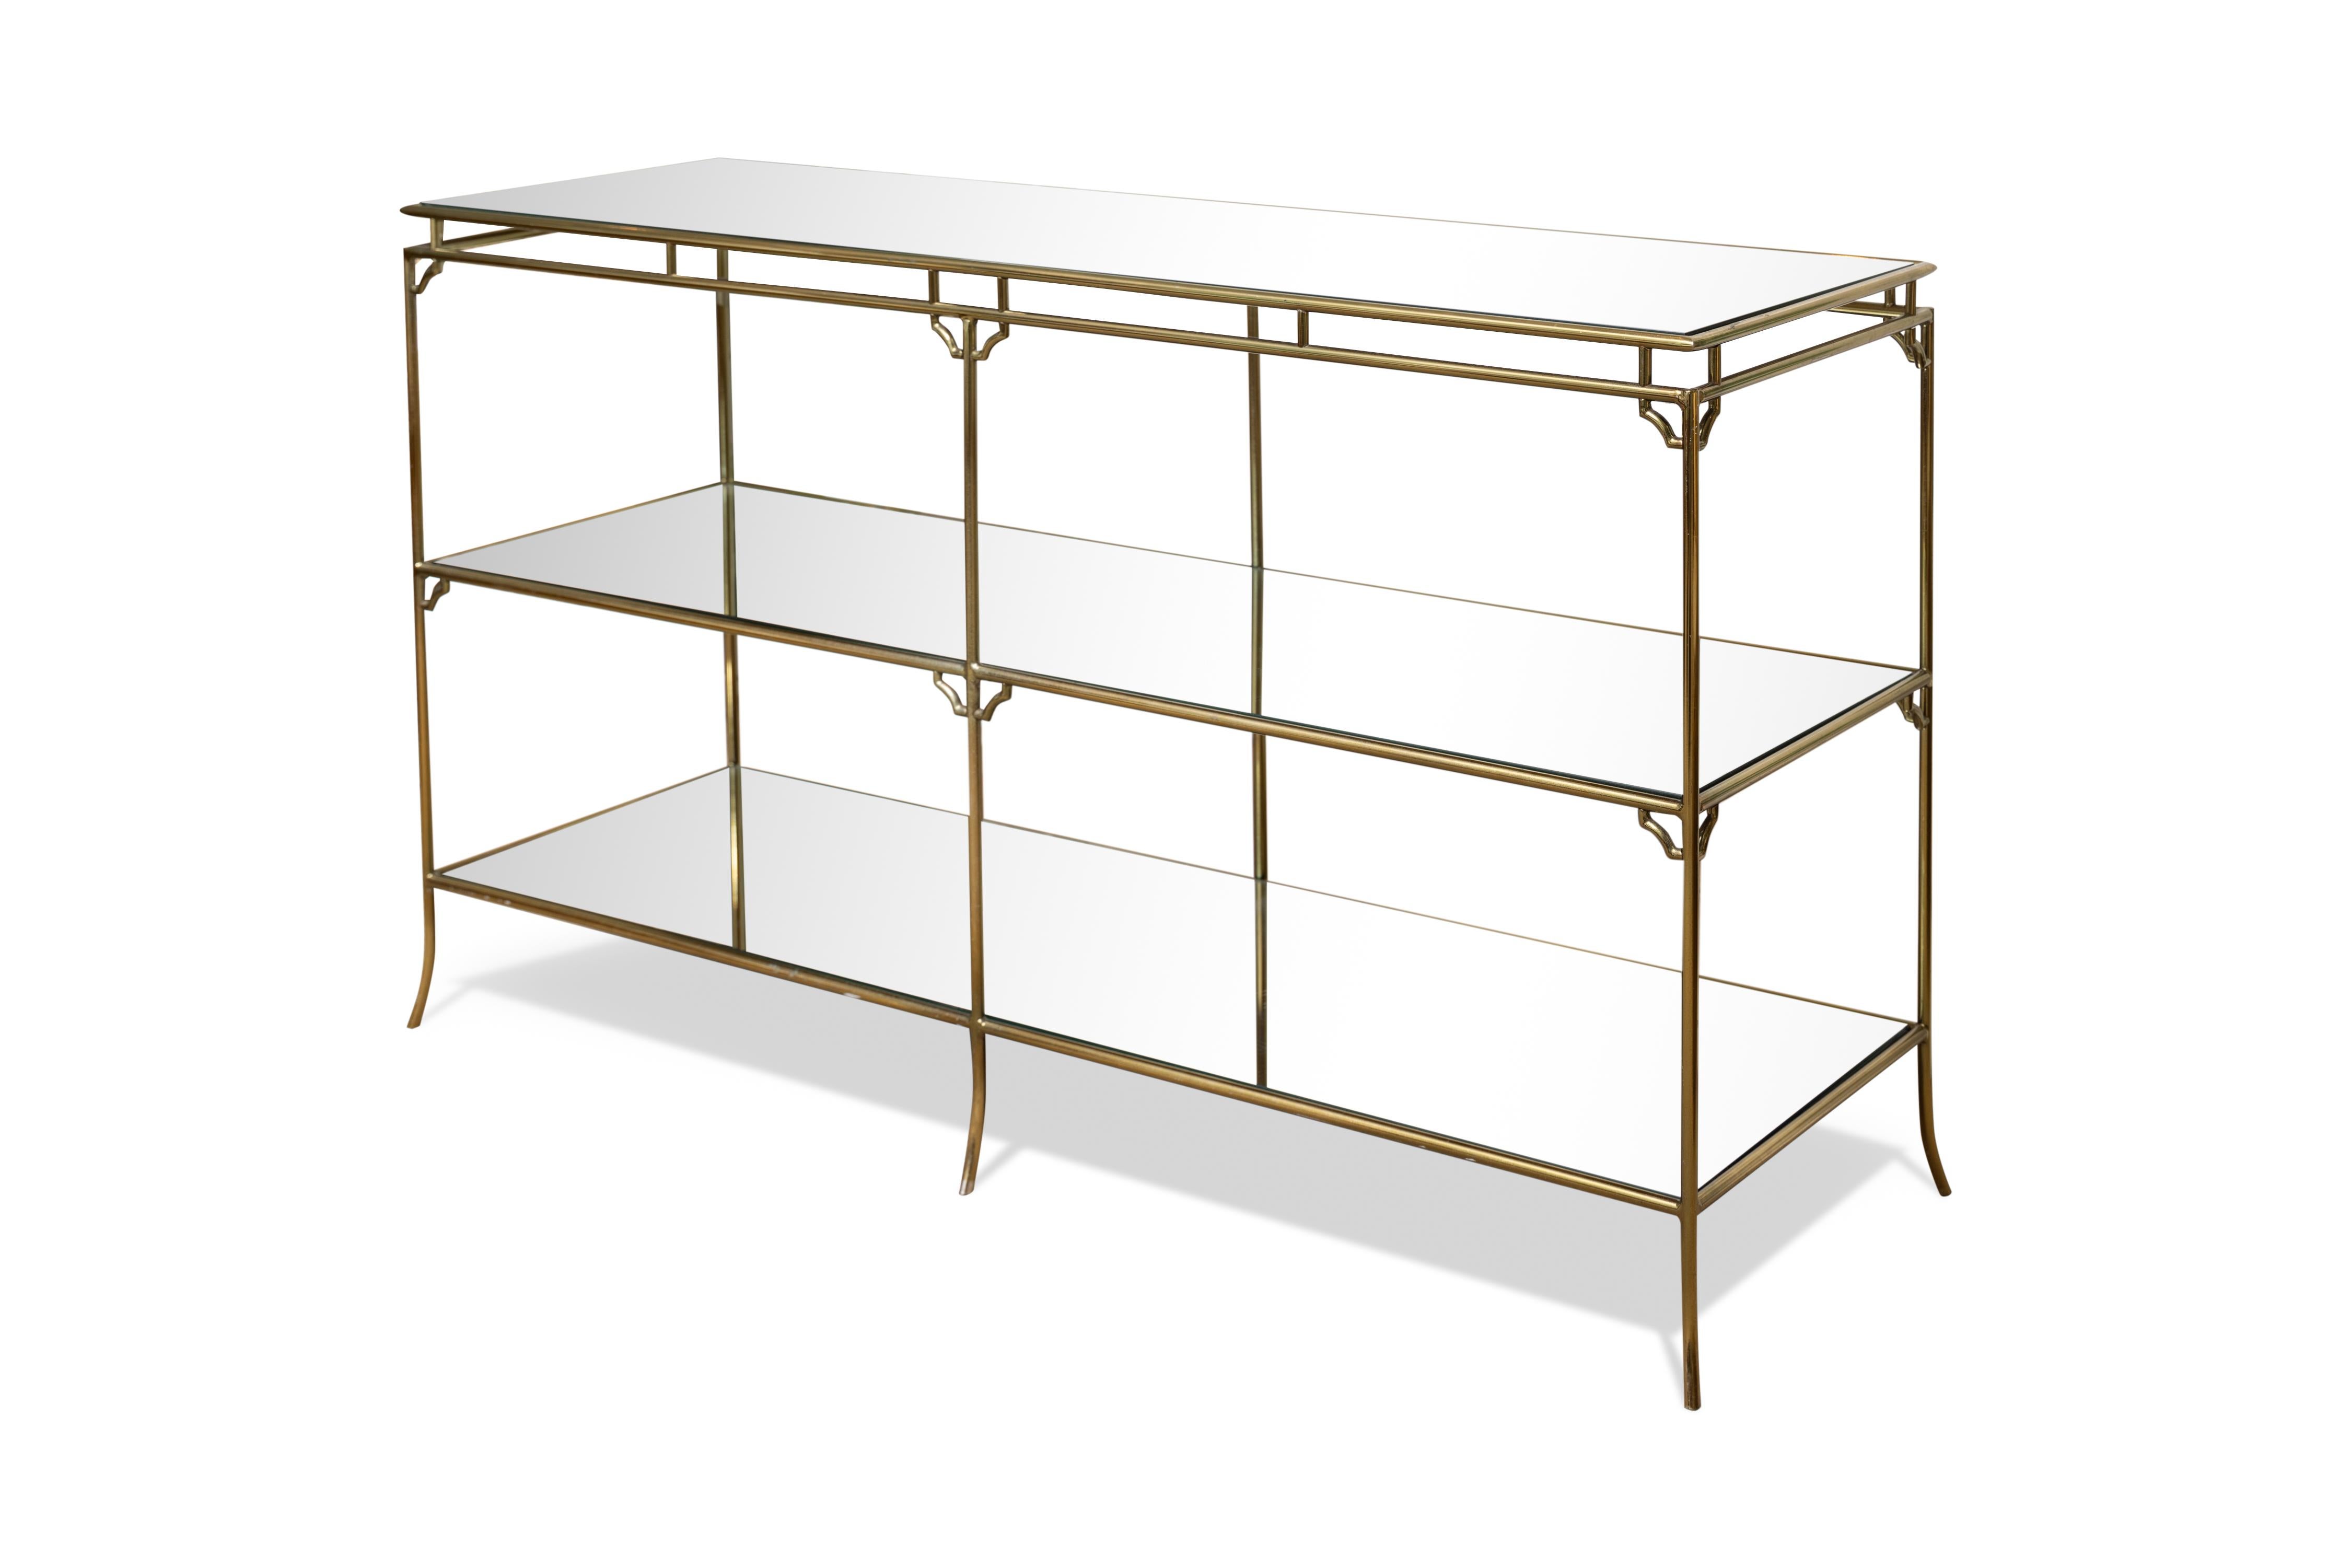 This beautiful super chic vintage three tier brass bamboo console with mirrored shelves is the perfect addition to any room in your home! The mirrored shelves add an elegant and elevated look to this beautiful midcentury brass bamboo console.